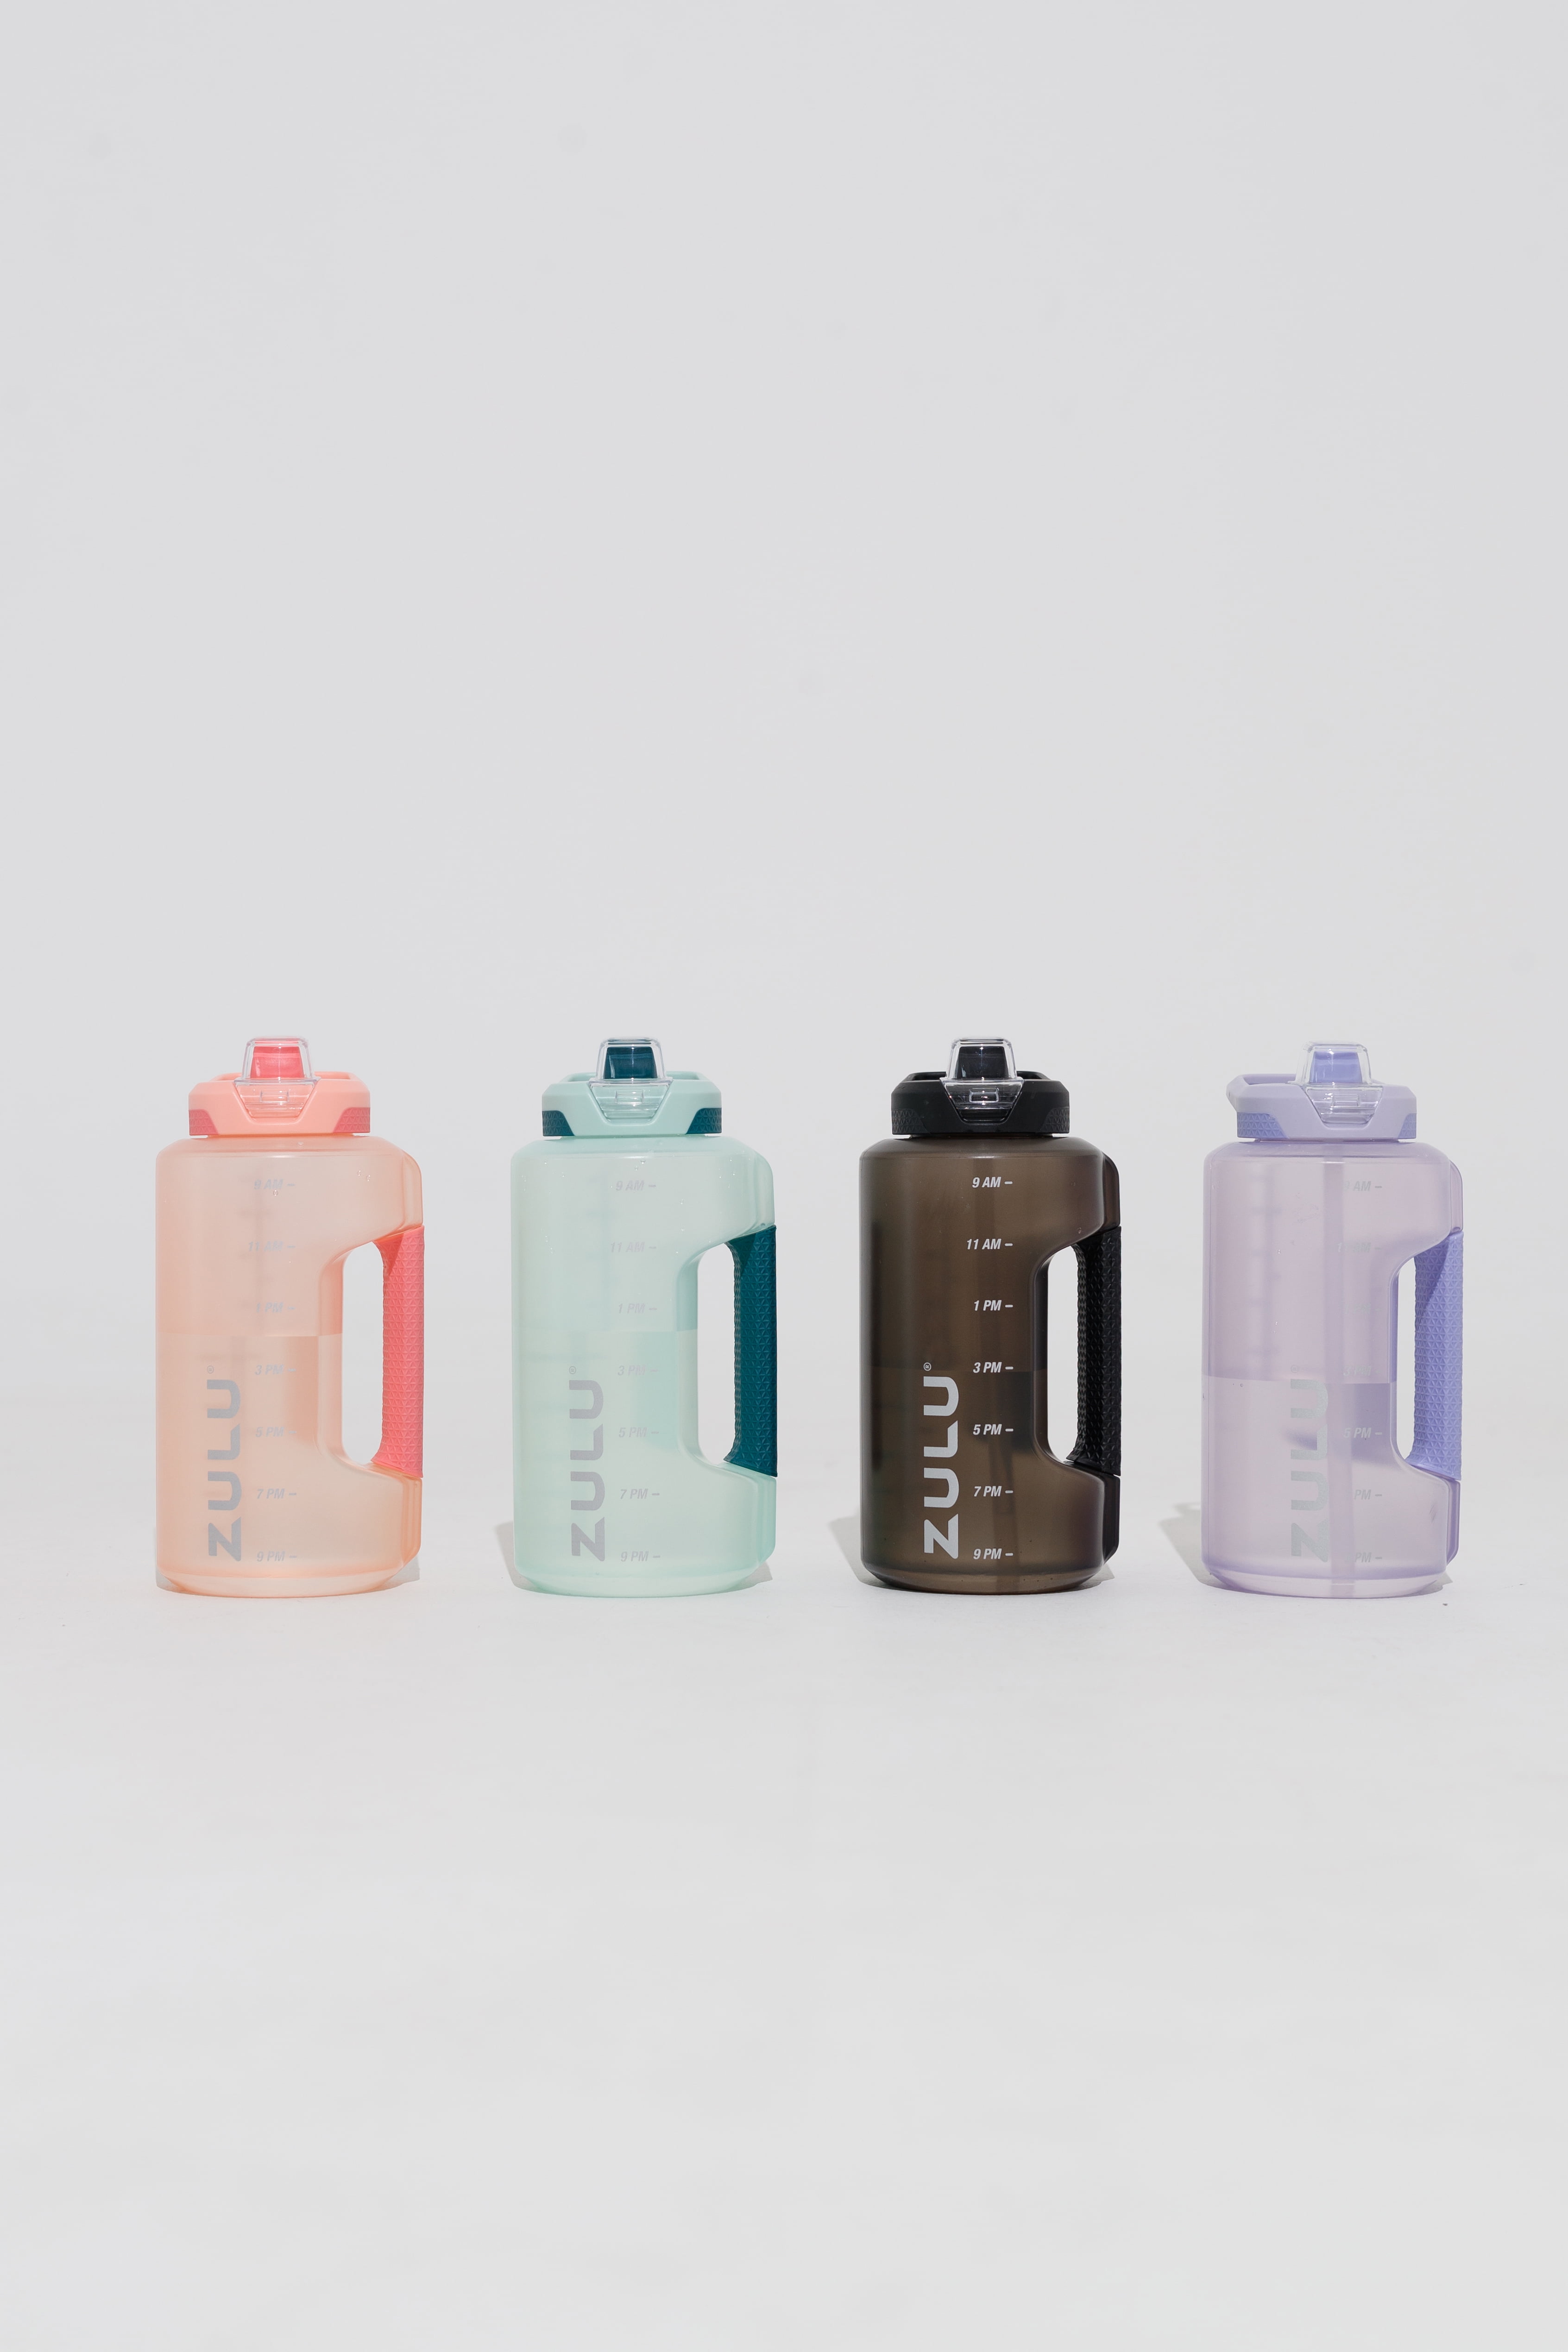 Wholesale zulu water bottle to Store, Carry and Keep Water Handy 